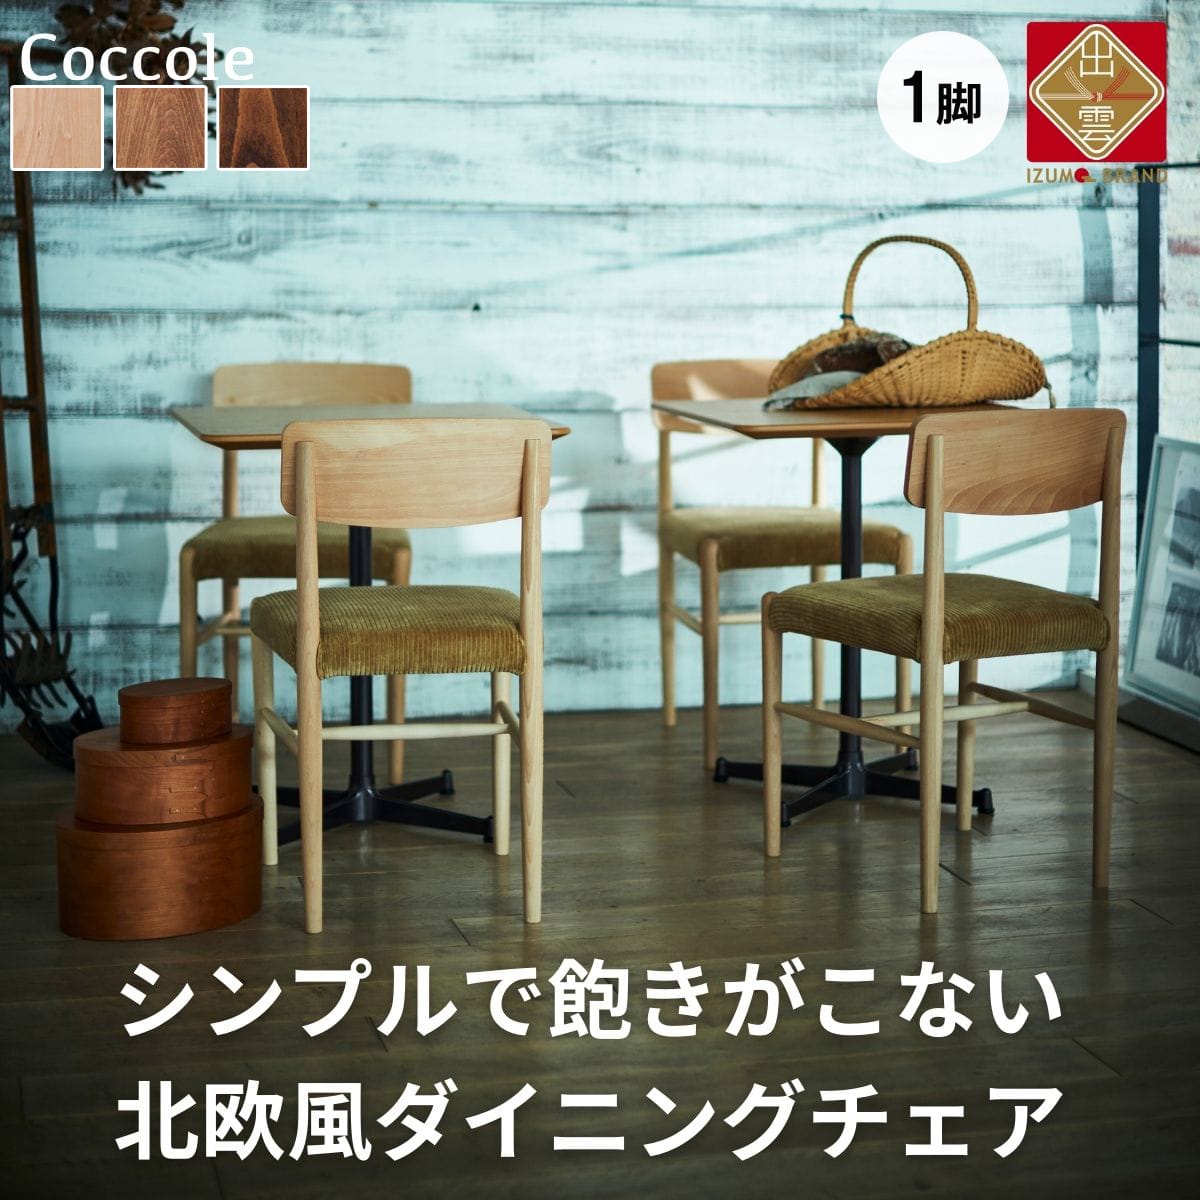 Coccole ダイニングチェア 1脚 椅子 チェア 単品 完成品 座面高さ45